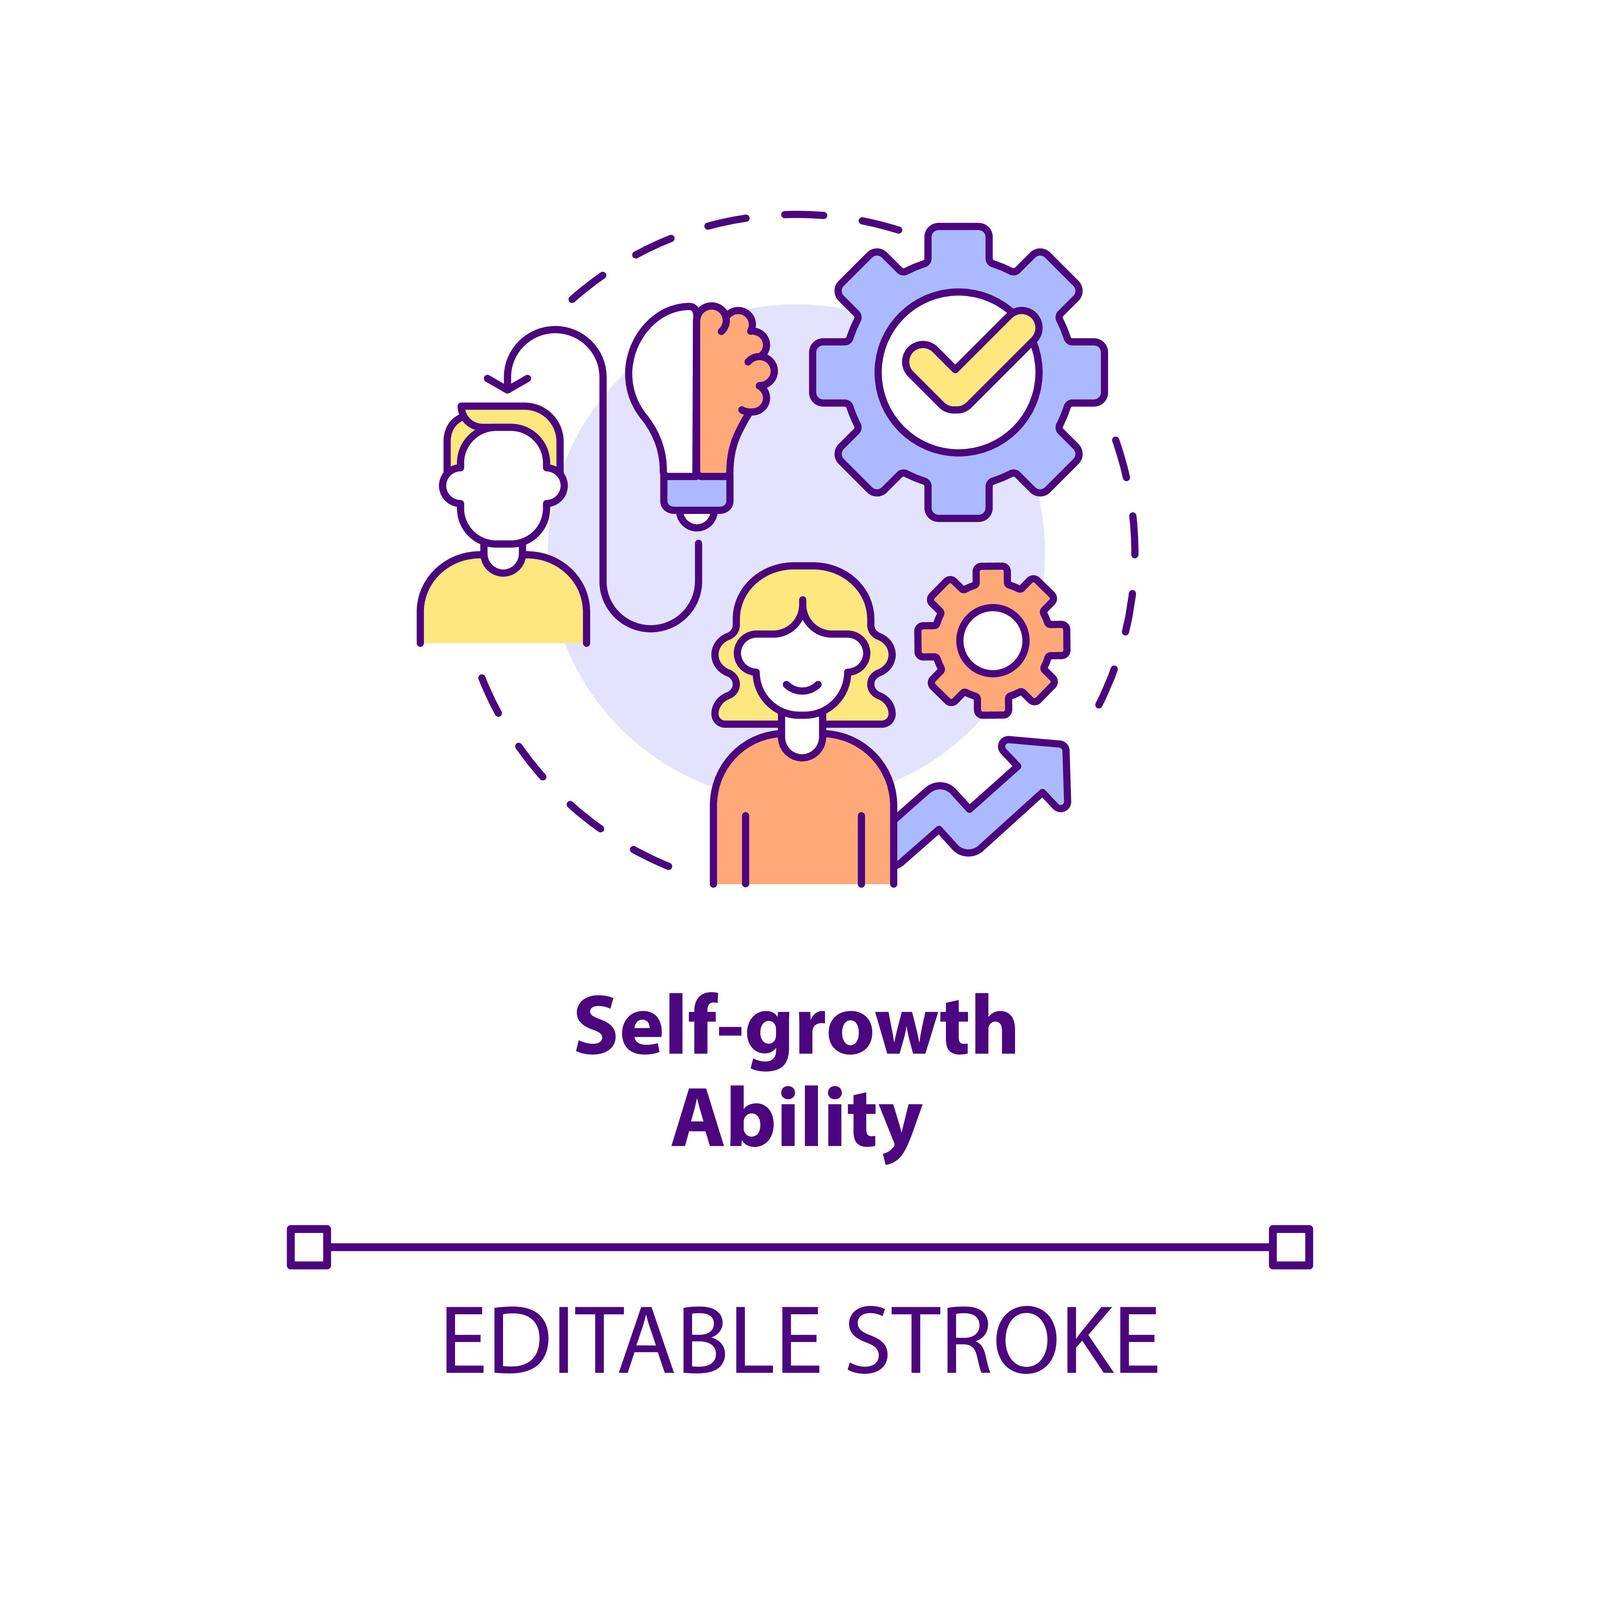 Self-growth ability concept icon by bsd